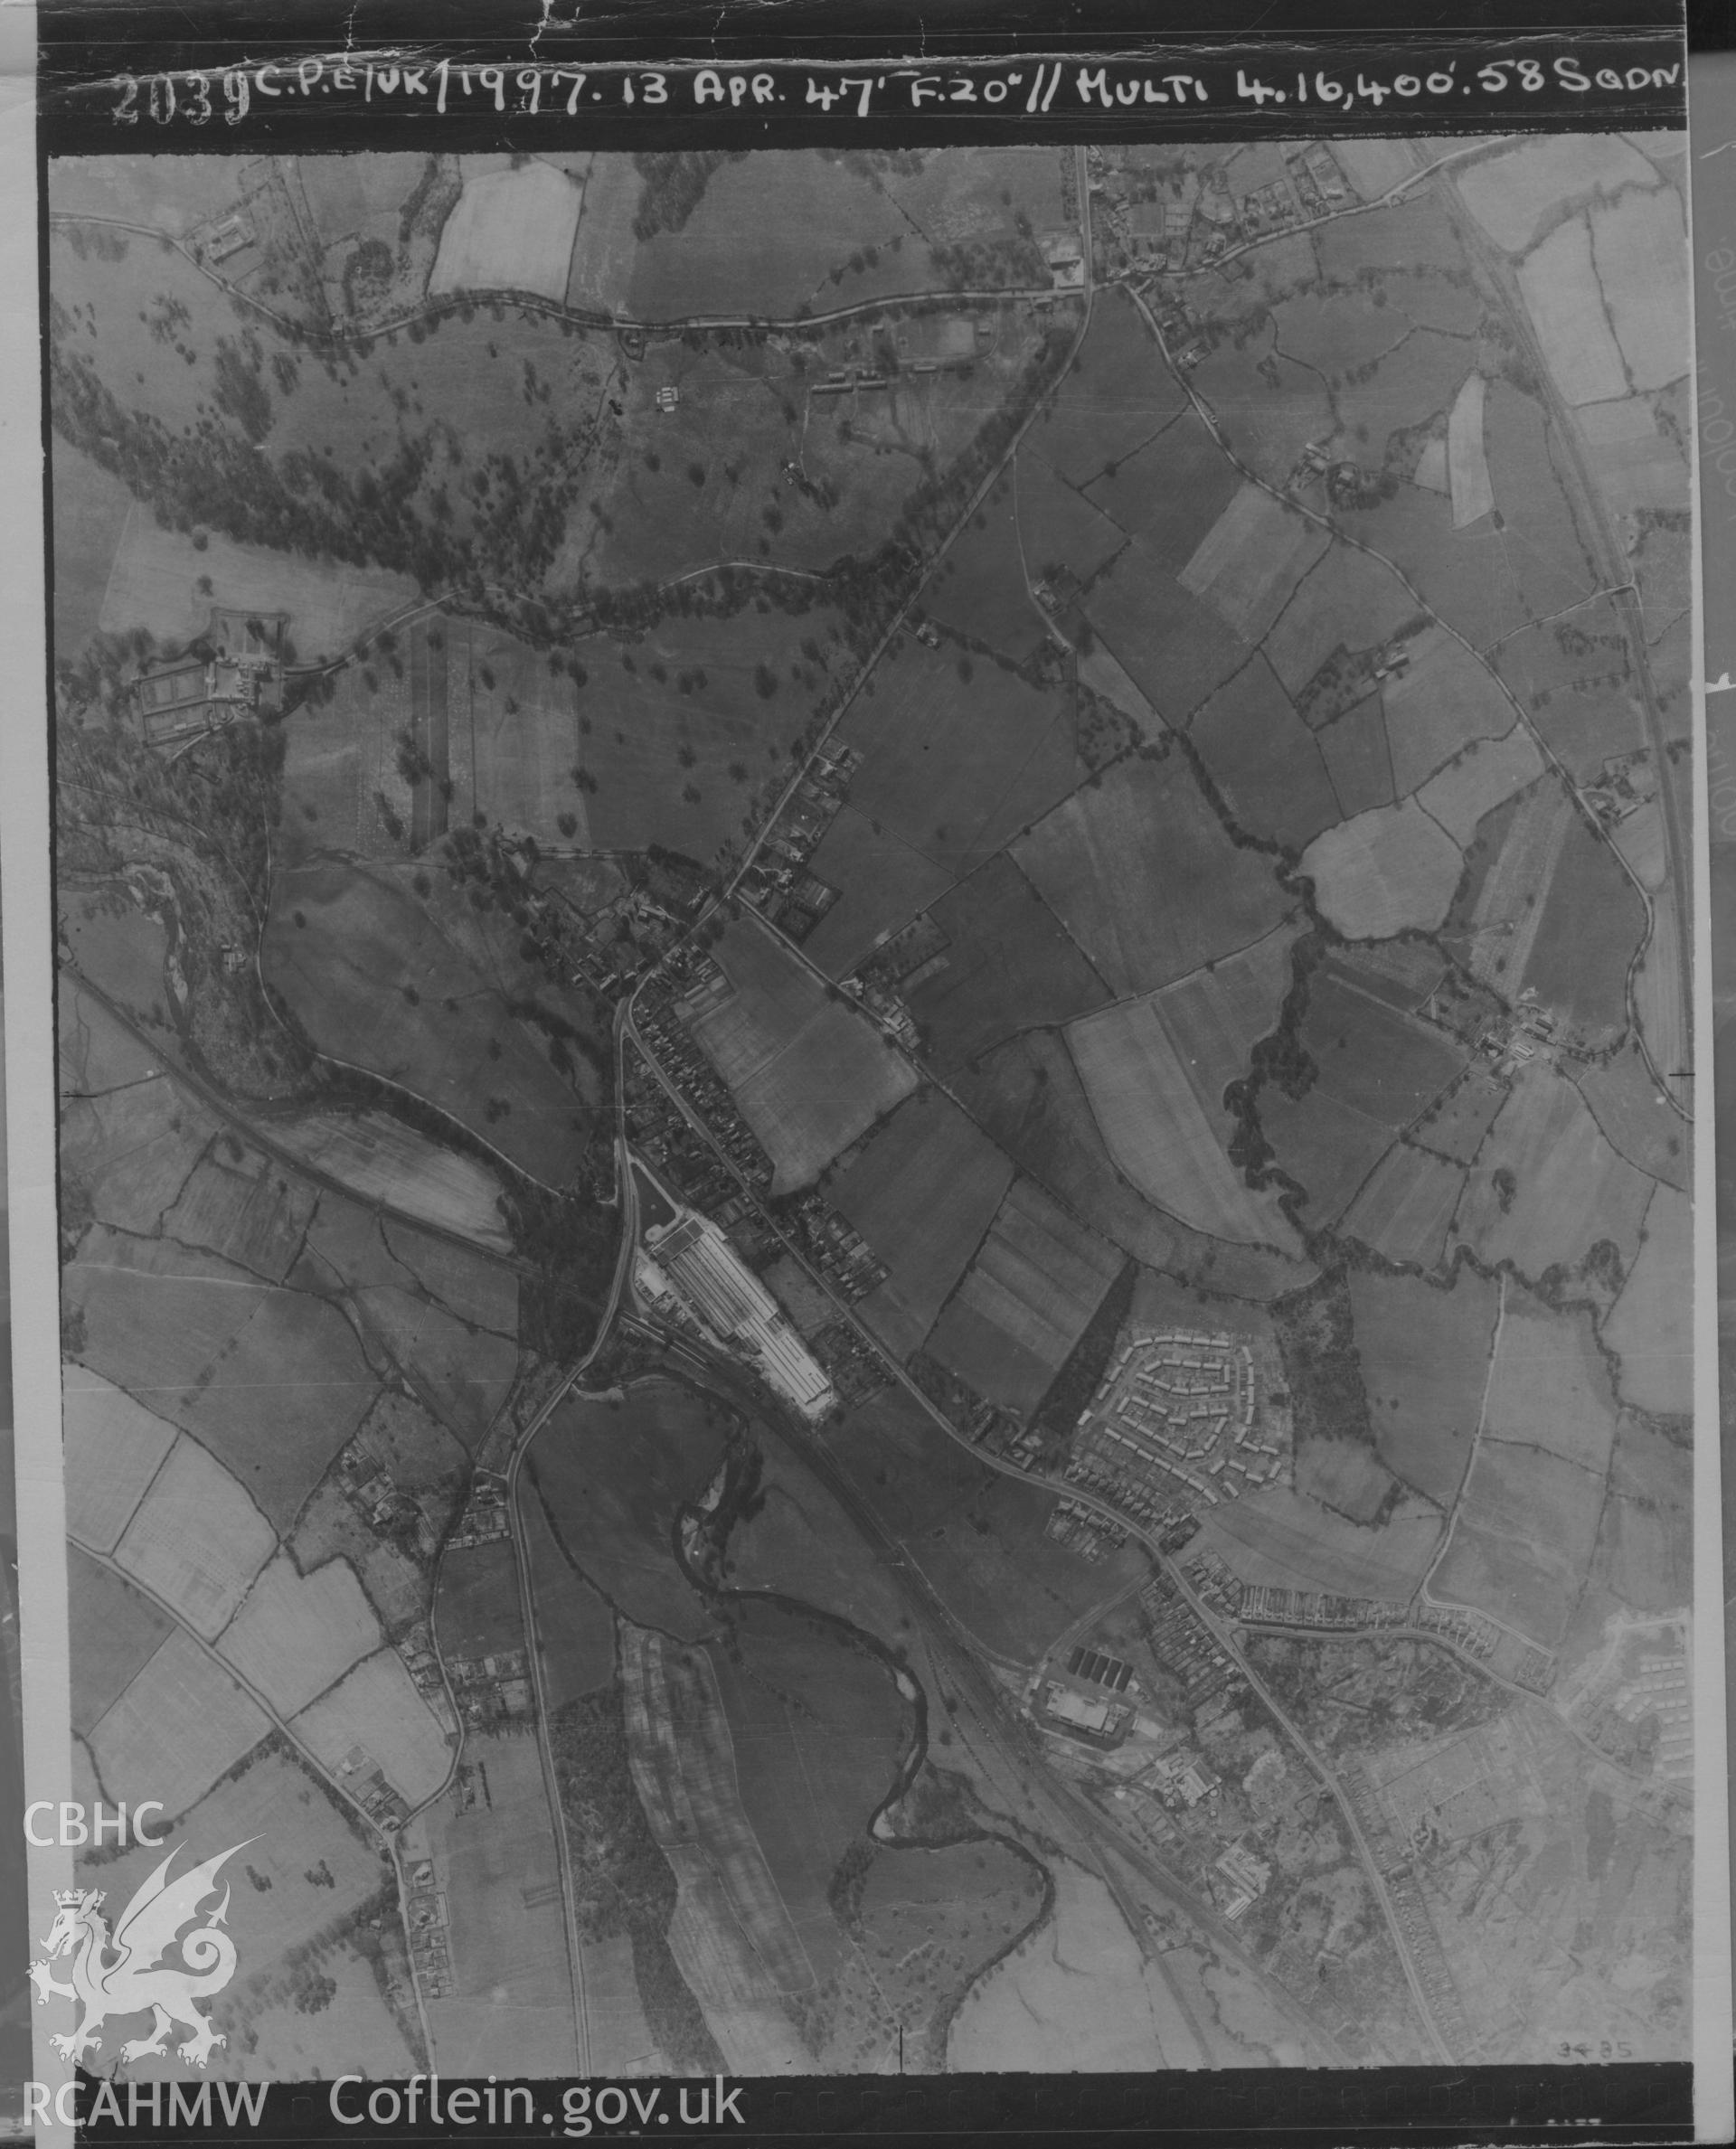 Aerial photograph of Cwmbran, taken on 13th April 1947. Included as part of Archaeology Wales' desk based assessment of former Llantarnam Community Primary School, Croeswen, Oakfield, Cwmbran, conducted in 2017.